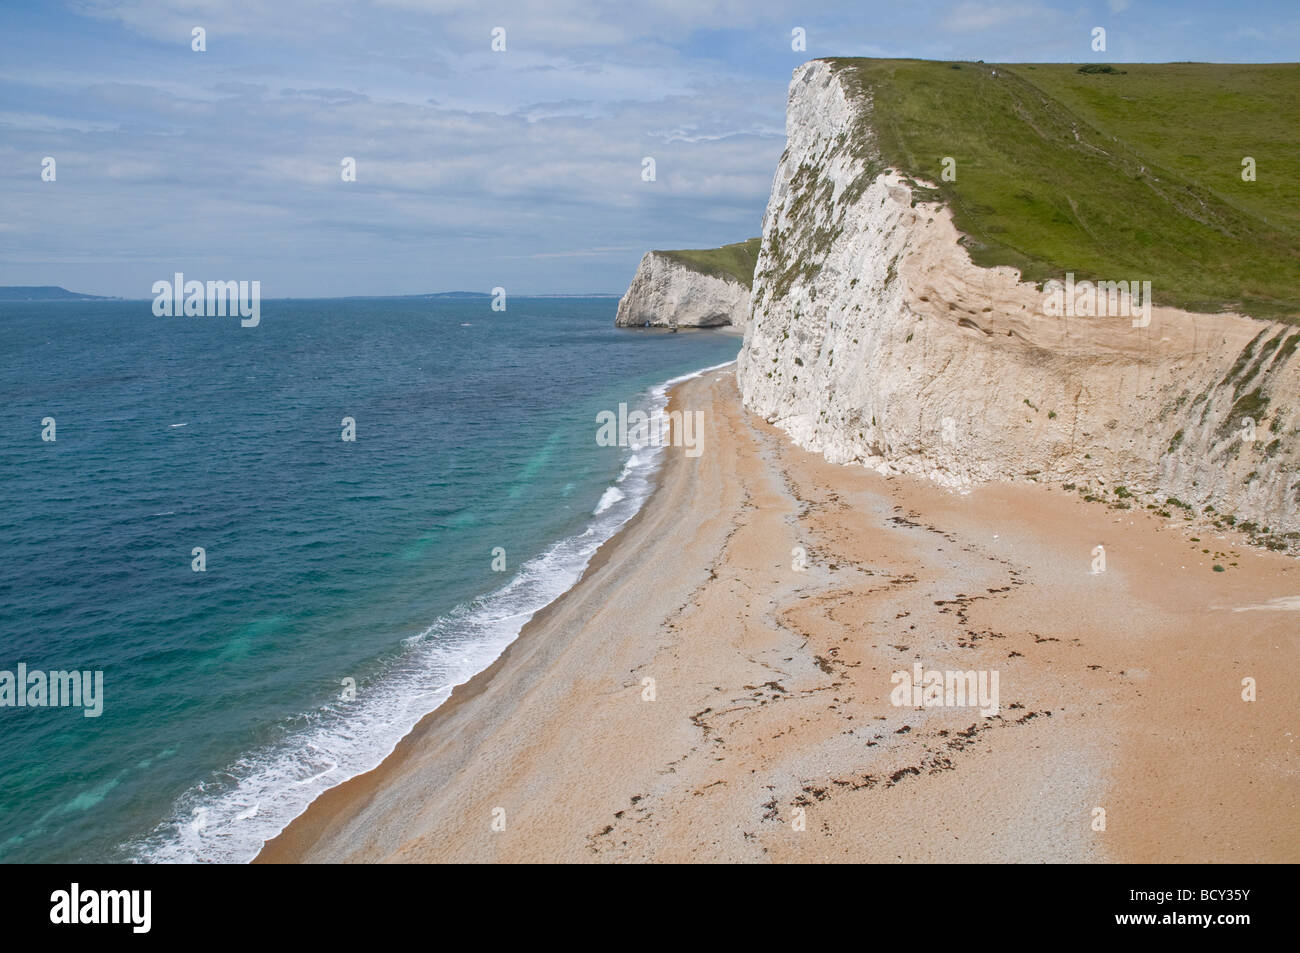 Stunning coastline looking east near Durdle Door on Dorset's south coast, with the chalk cliffs of Swyre Head very prominent. Stock Photo